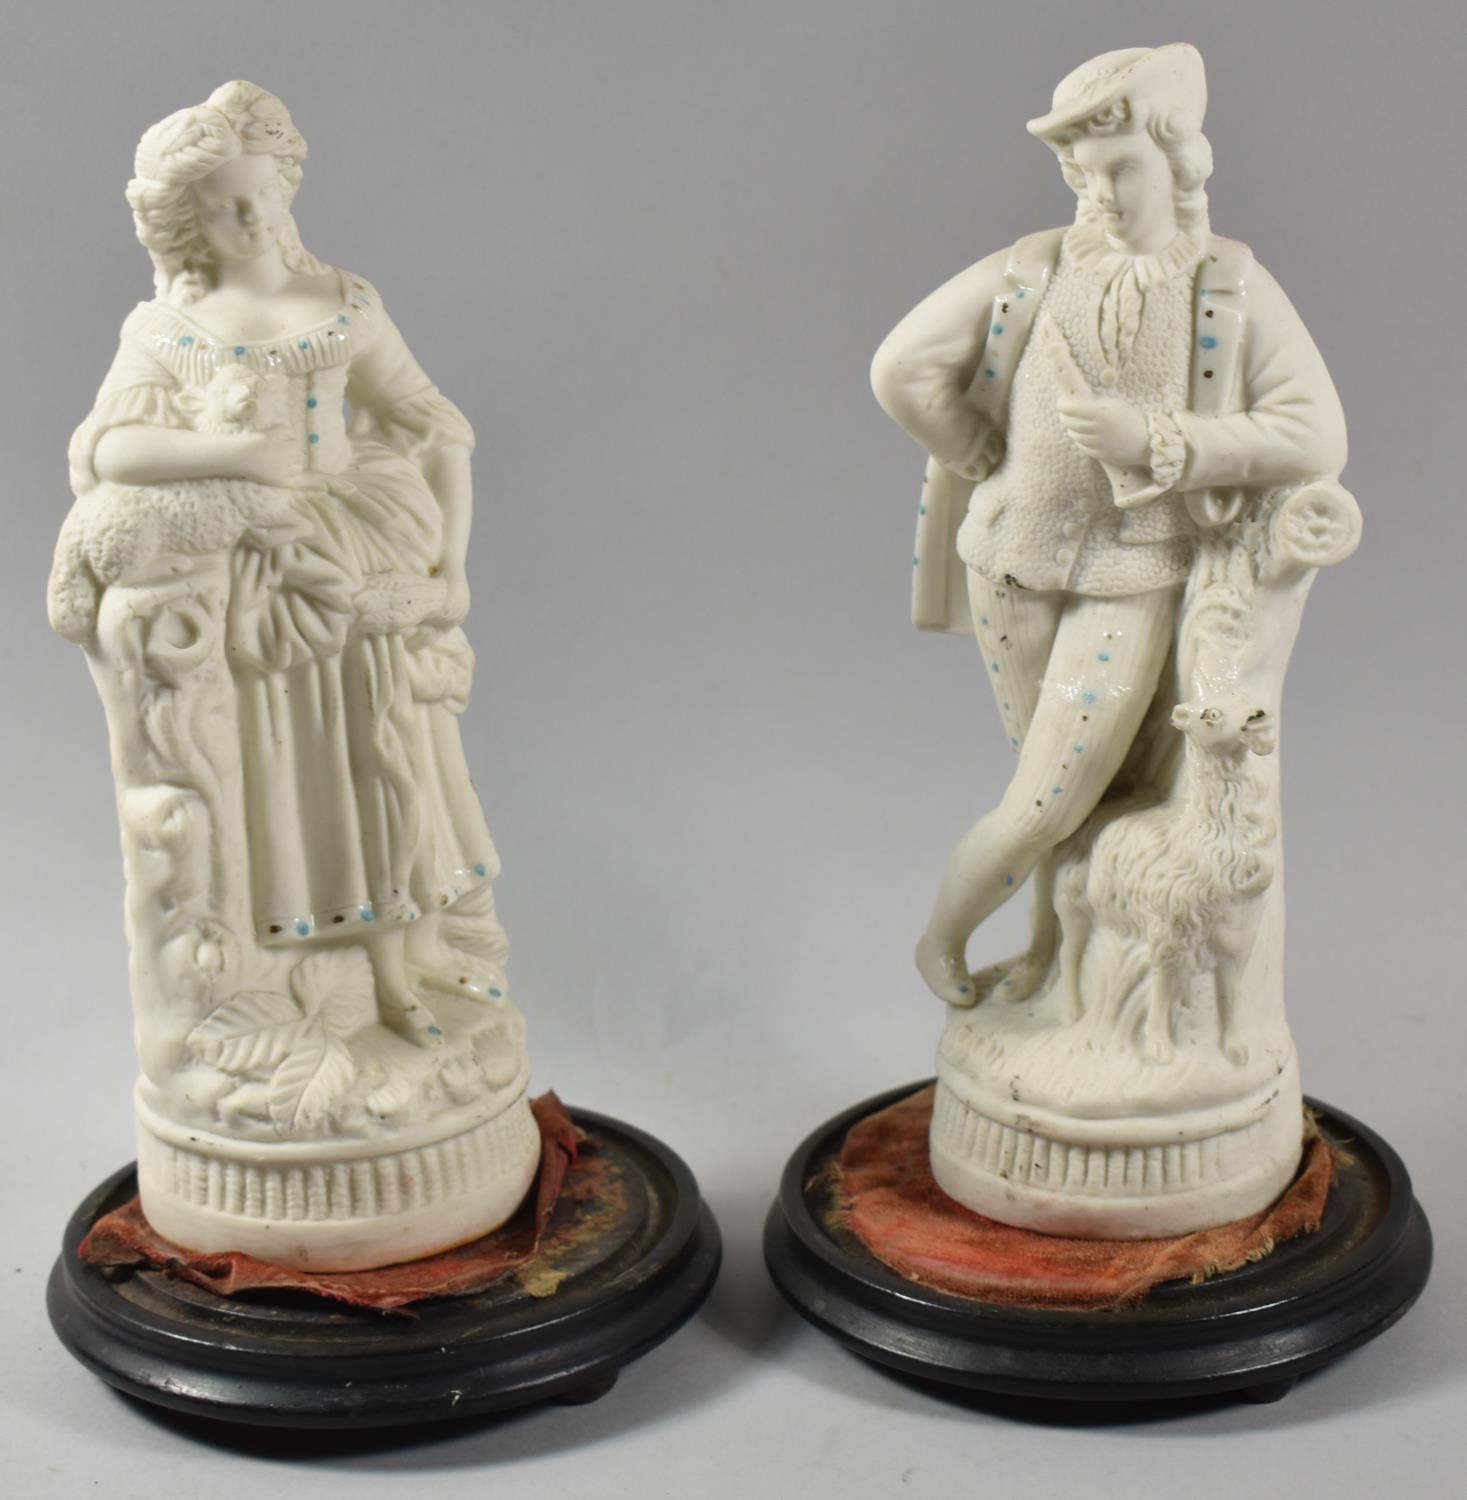 A Pair of Continental Bisque Figural Ornaments, "Shepherds", 26cm High